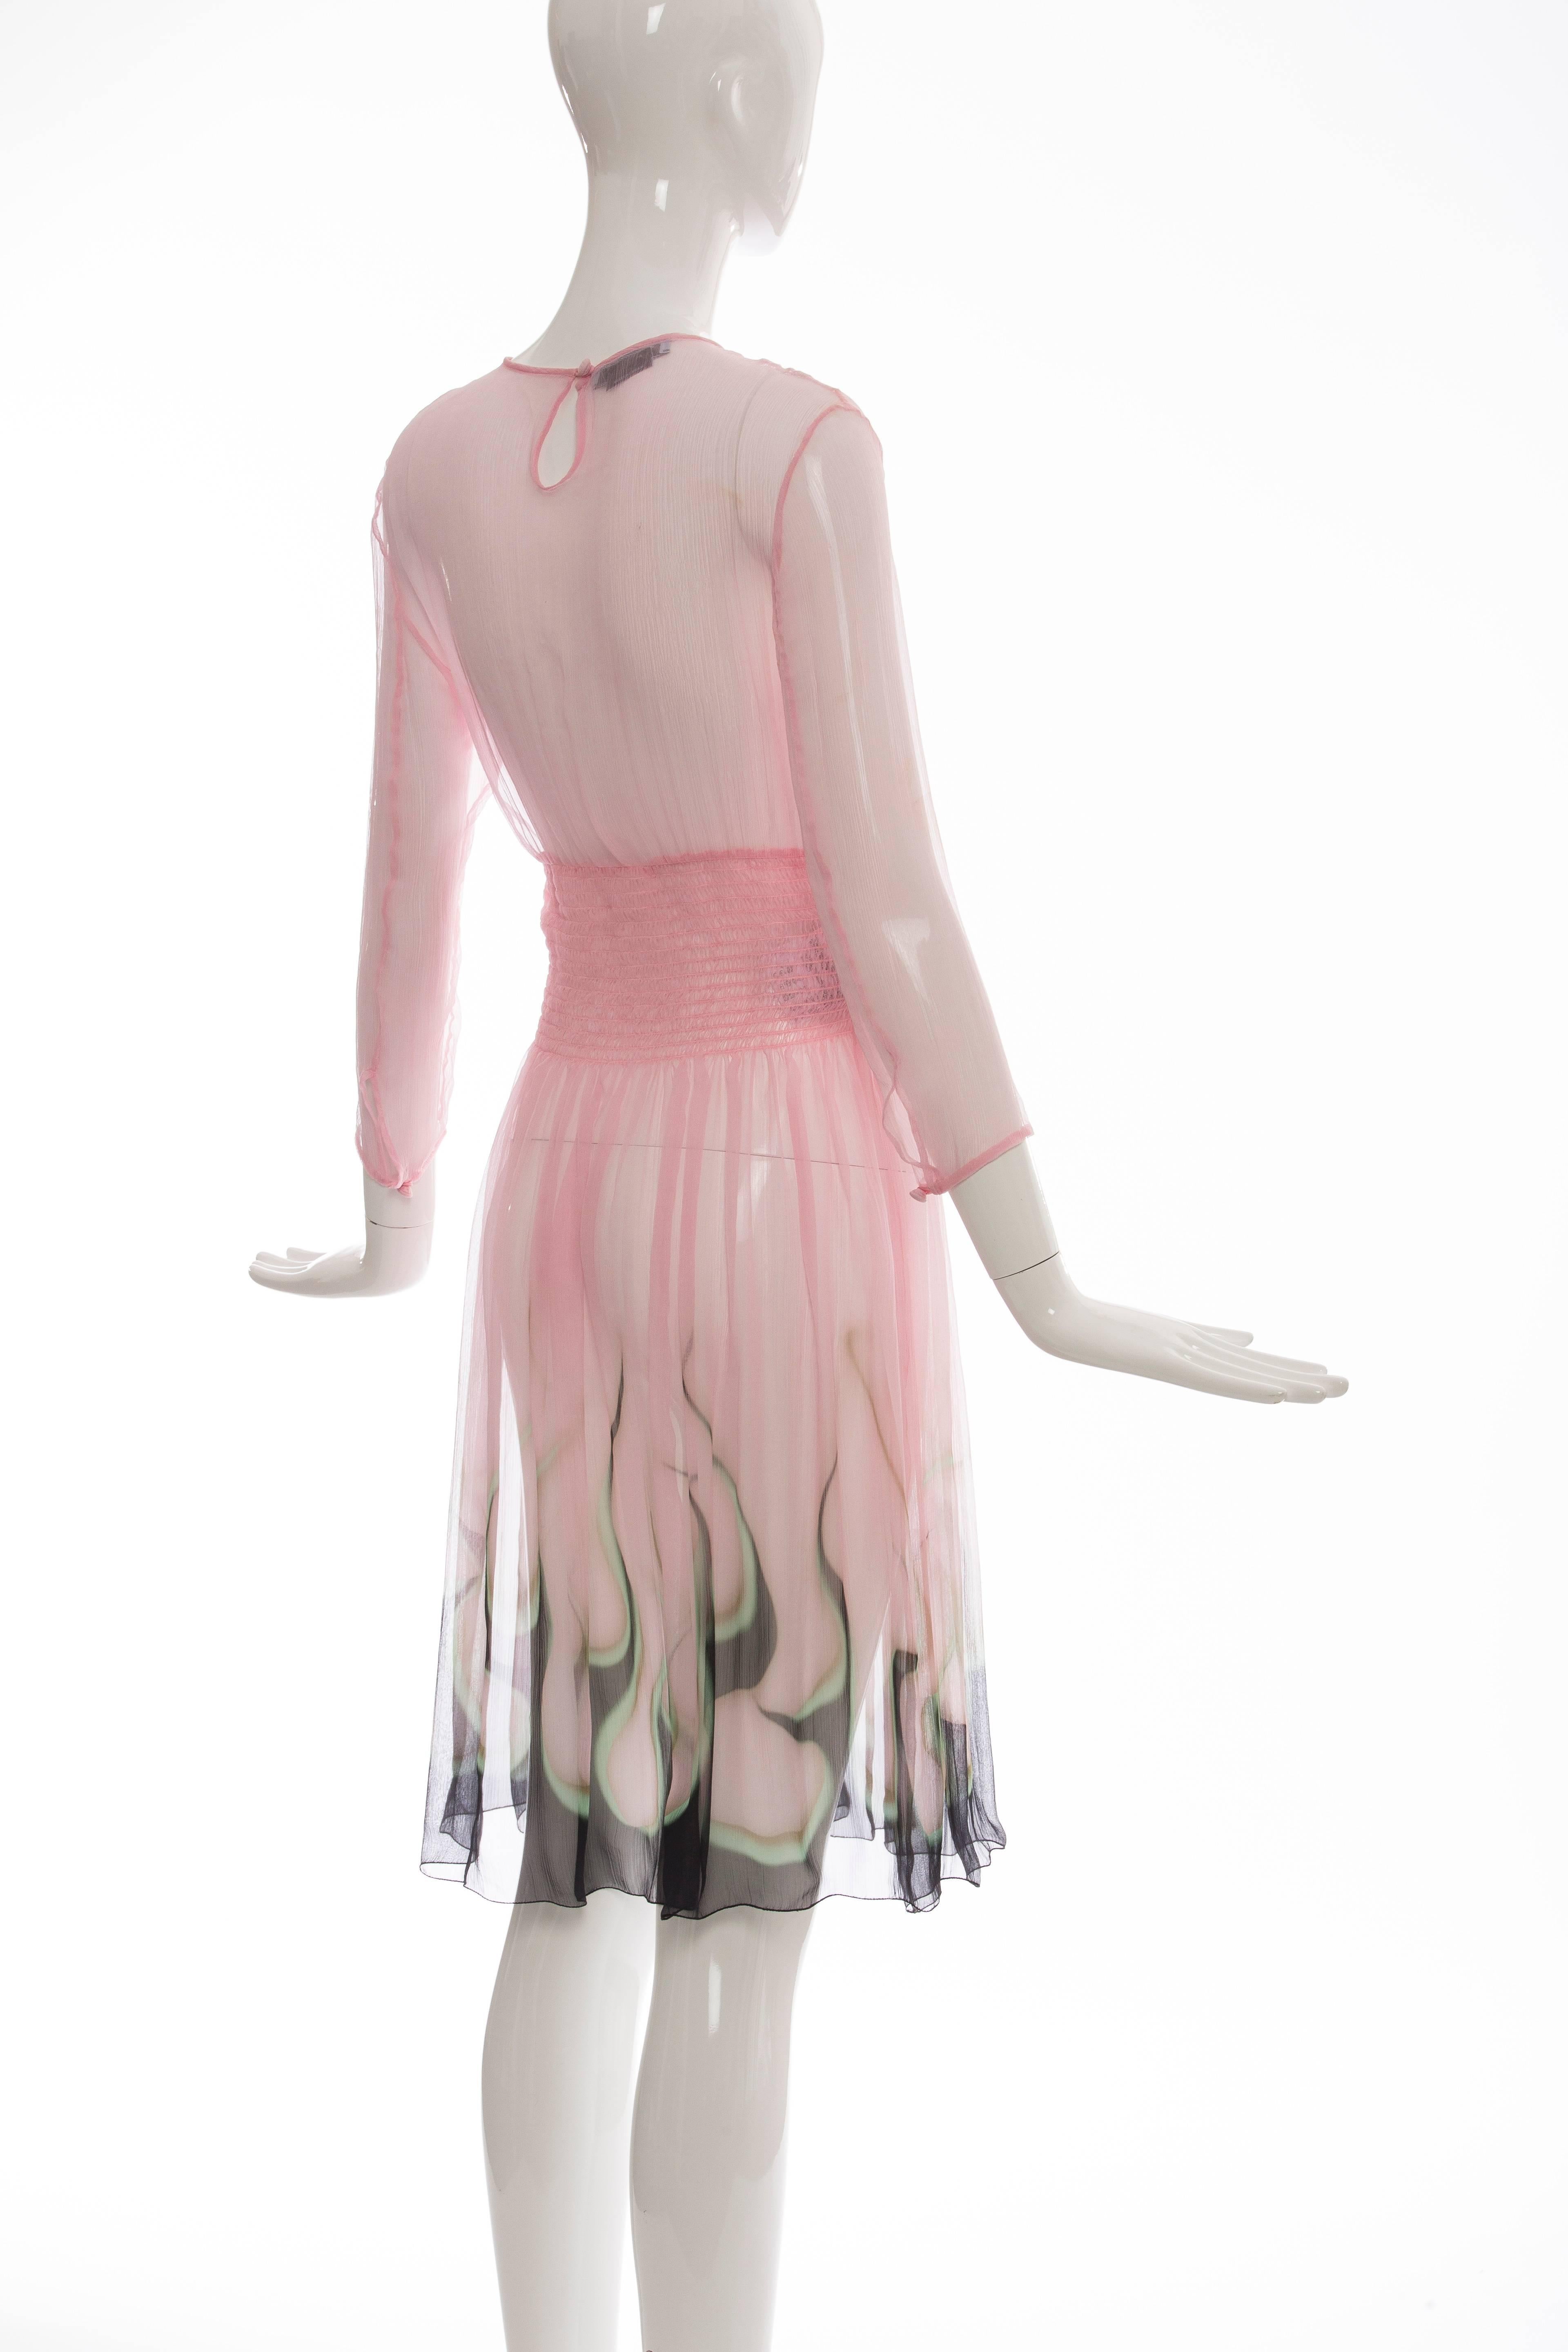 Prada Pink Silk Chiffon Dress With Flame Print At Hem, Spring 2012 In Excellent Condition In Cincinnati, OH